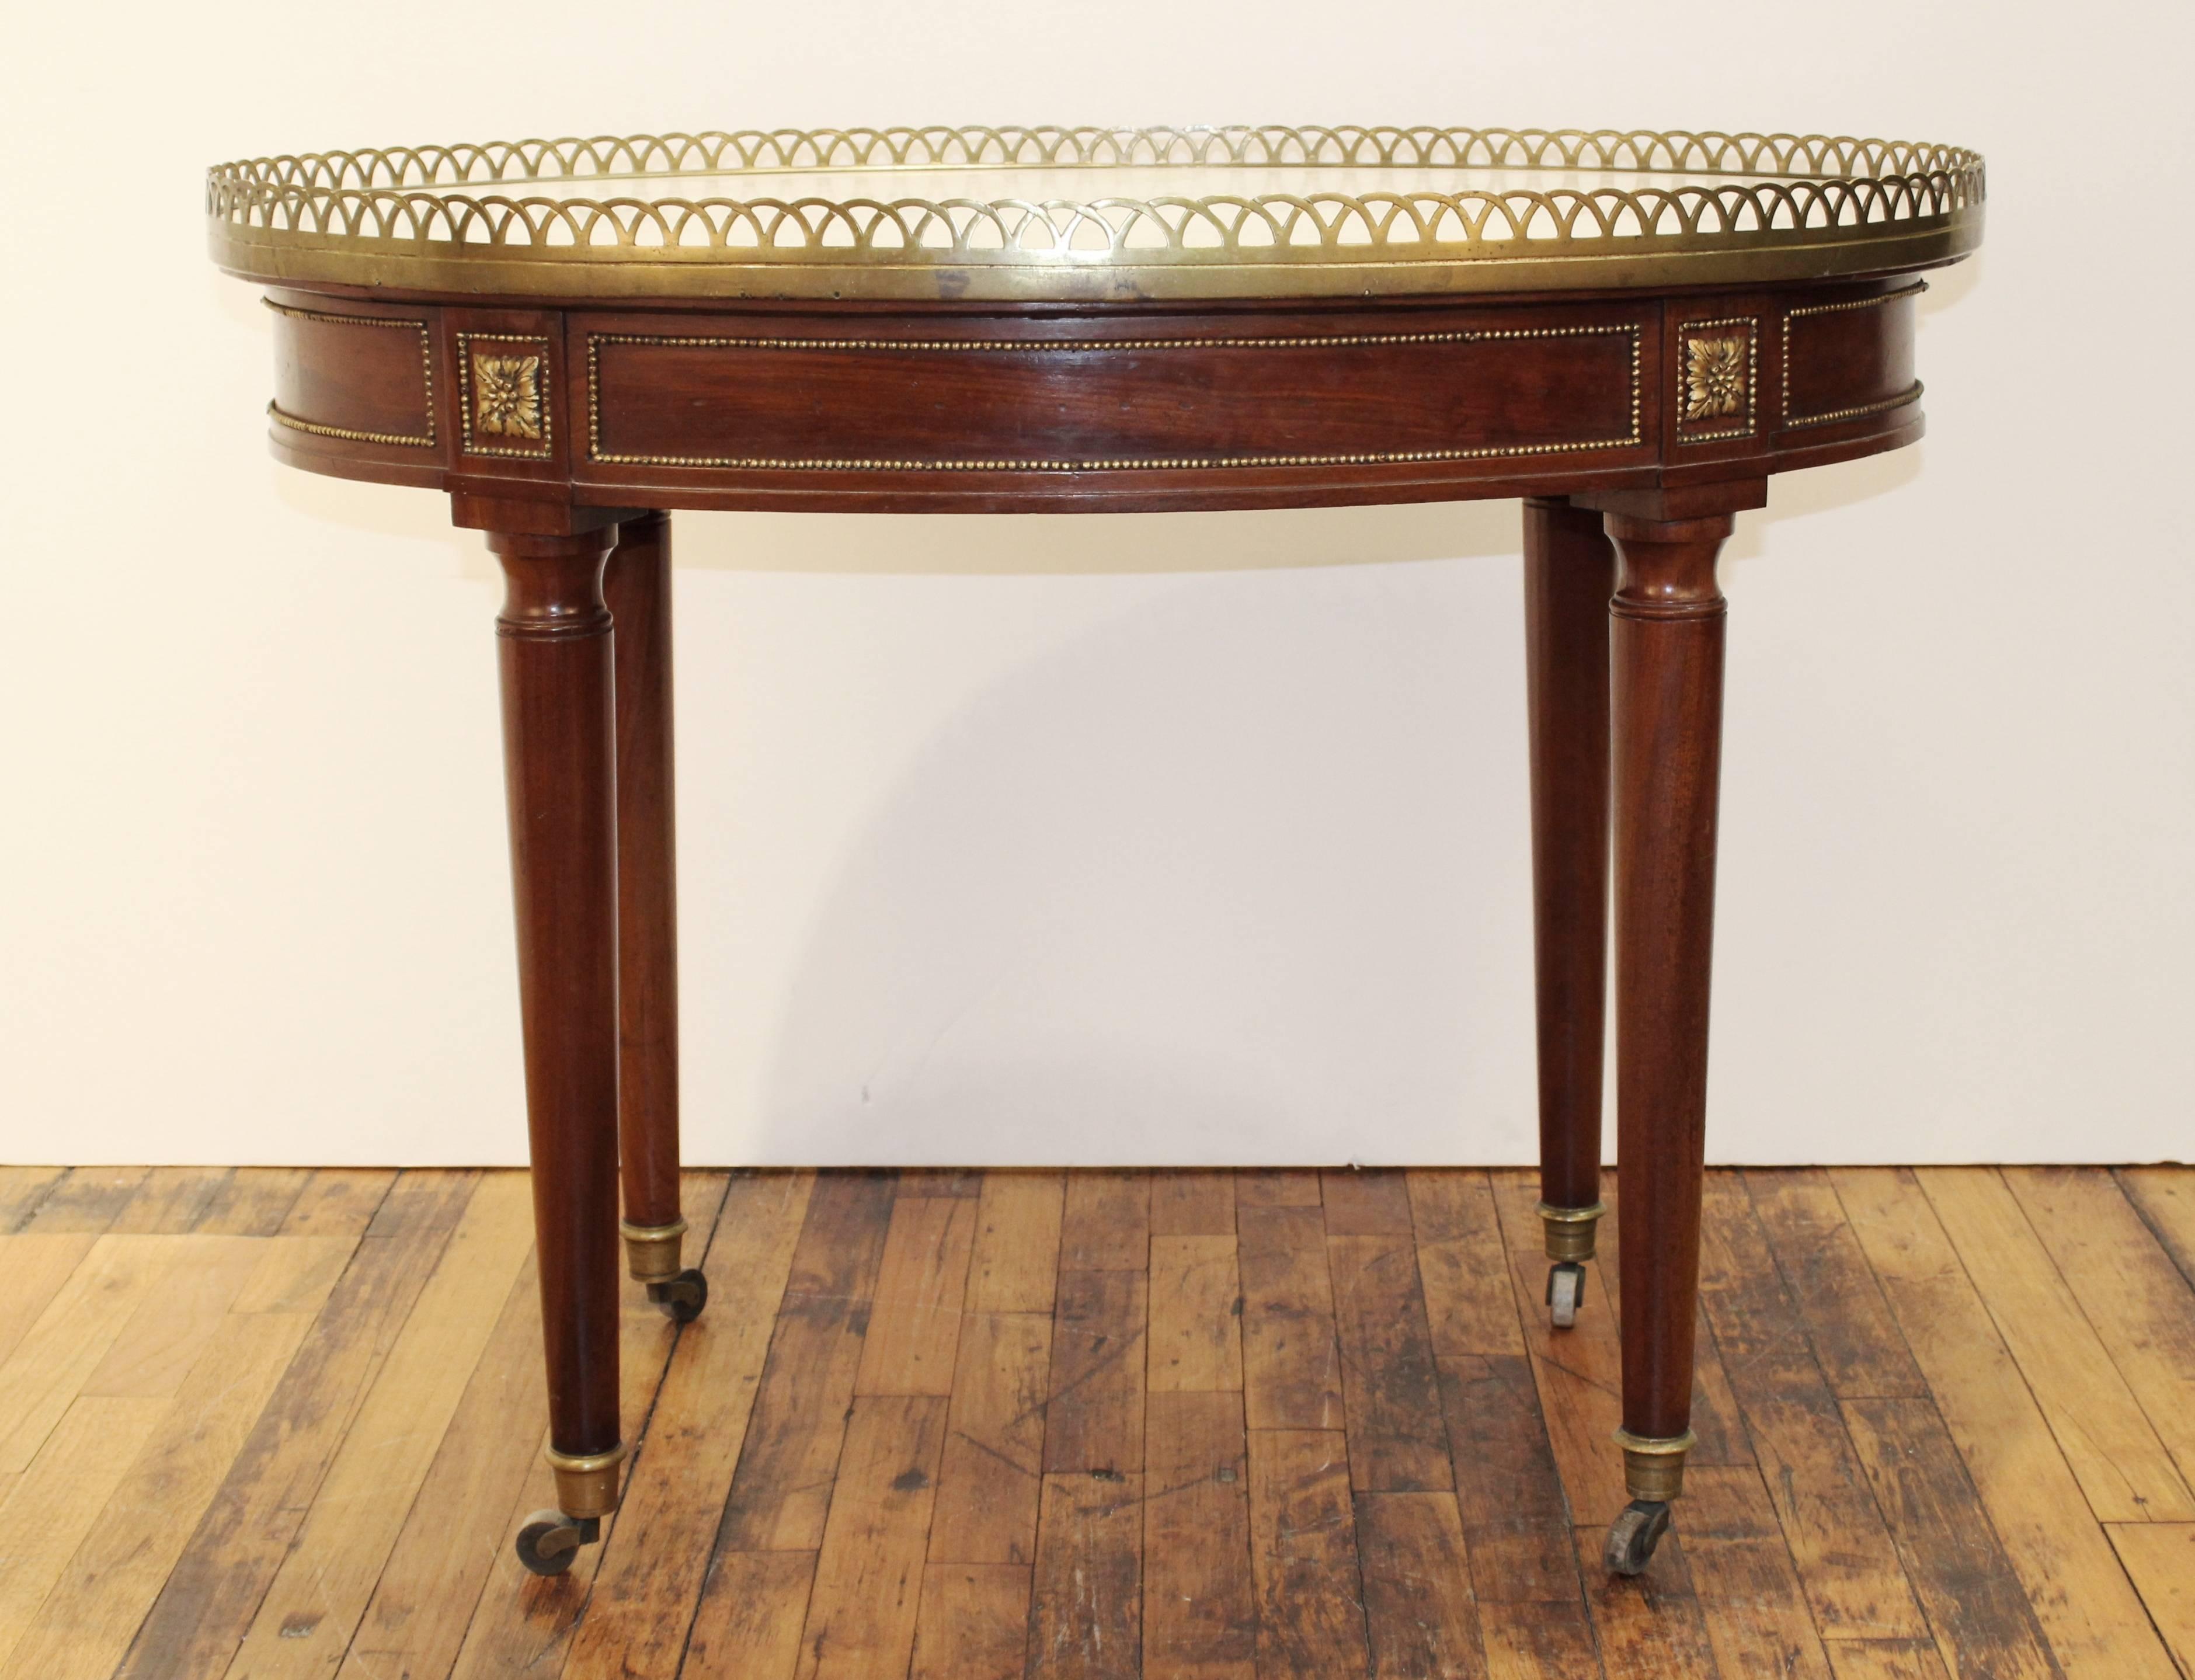 Mid-late 18th century side table by French cabinetmaker Georges Jacob (1739-1814, master 1765), oval galleried marble top on bronze-mounted mahogany base with bead trim border and rosettes; with casters. Markings include stamp [G. Jacob] with